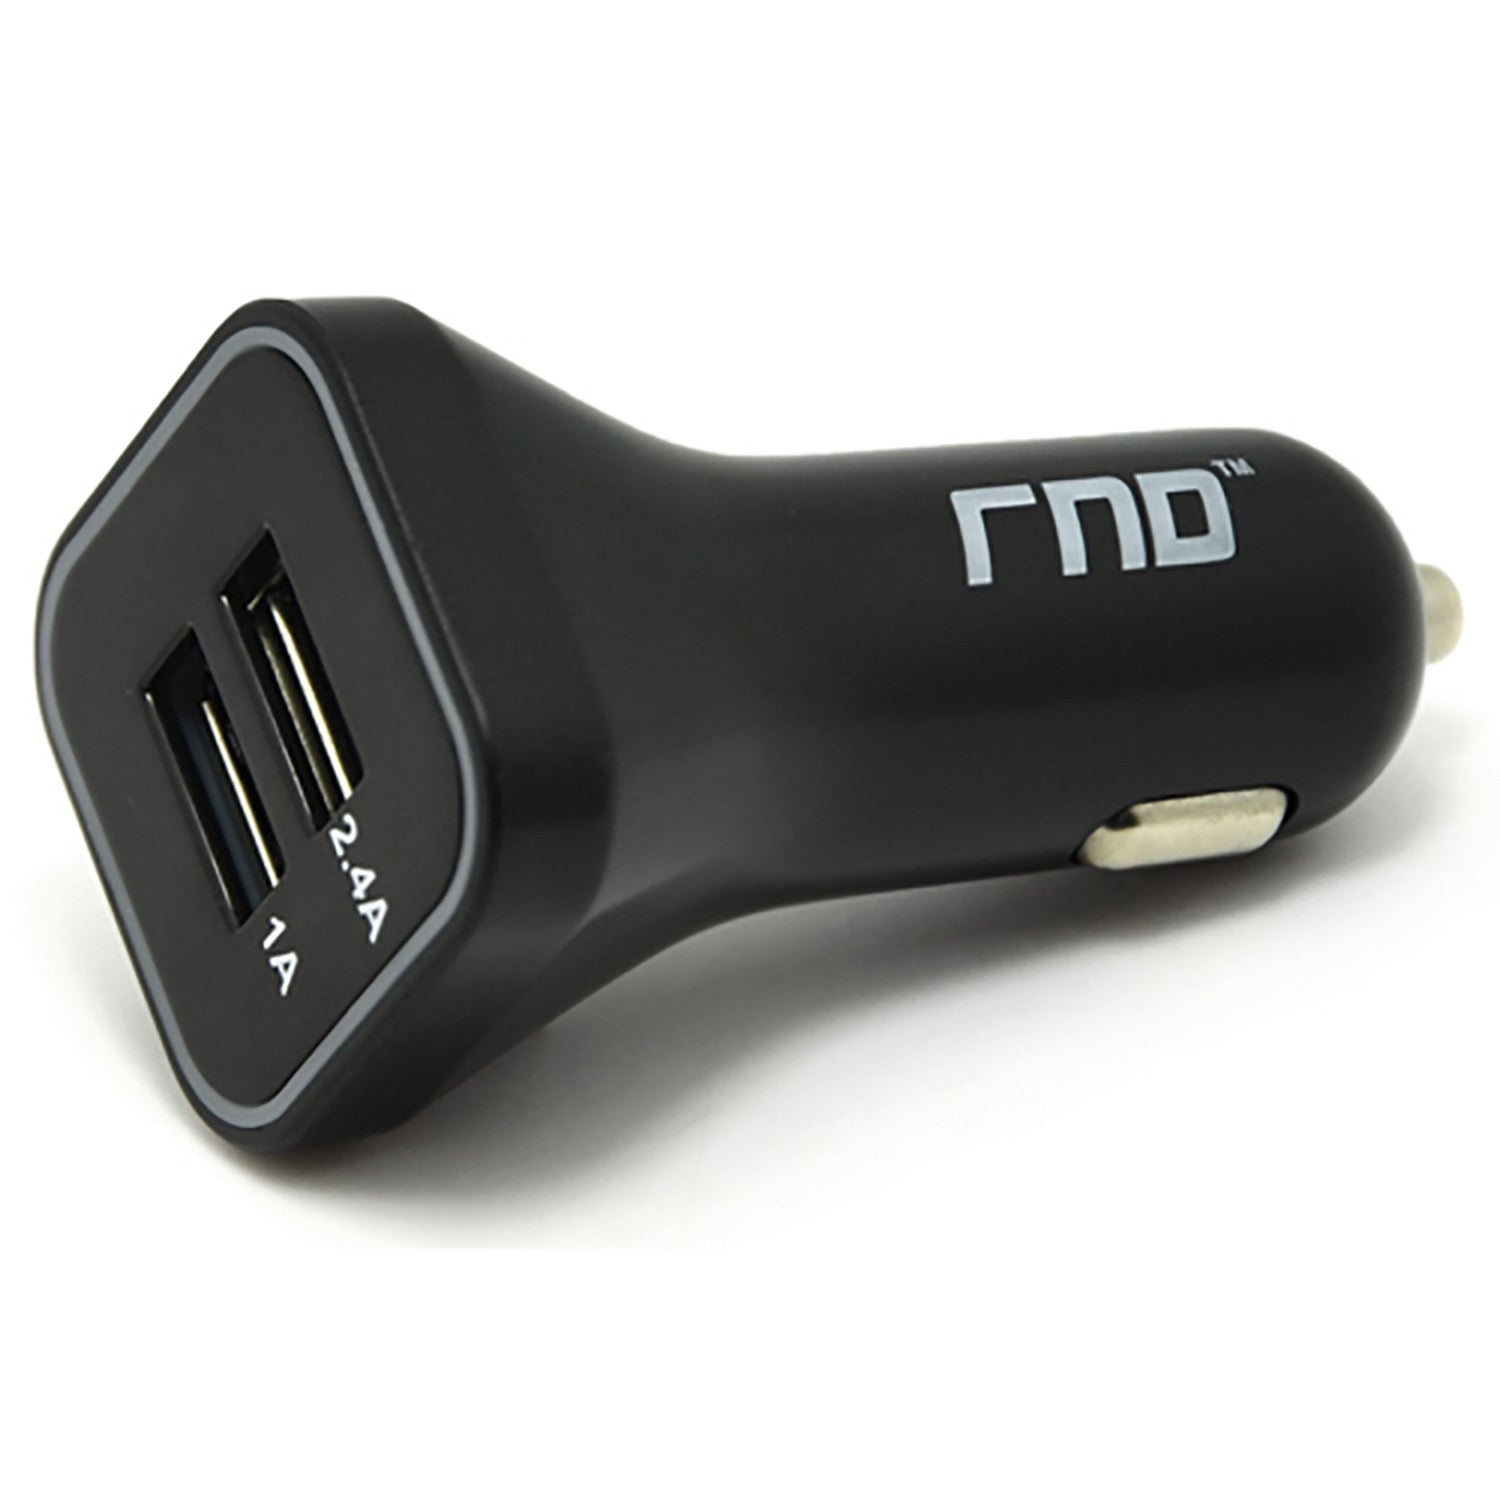 RND Dual 3.4A (fast) USB car charger for iPhones, Smartphones, iPads, Tablets, MP3 Players and Gaming Devices 